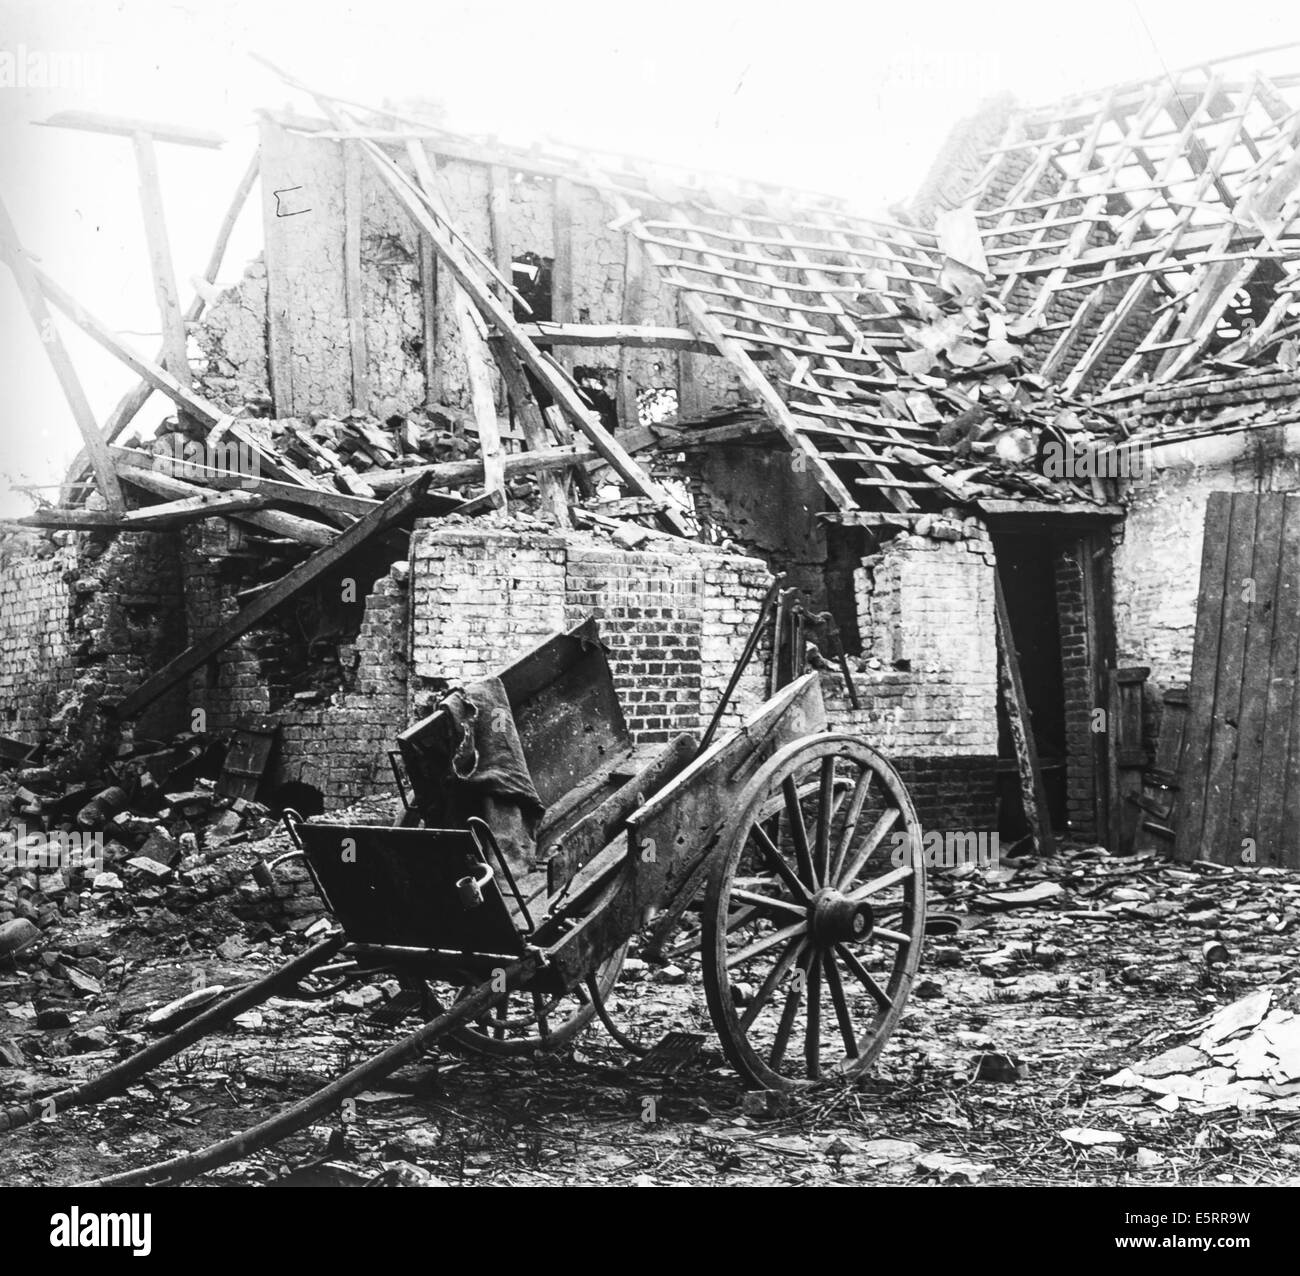 Ruined village in 1917, Aisne, France. Stock Photo